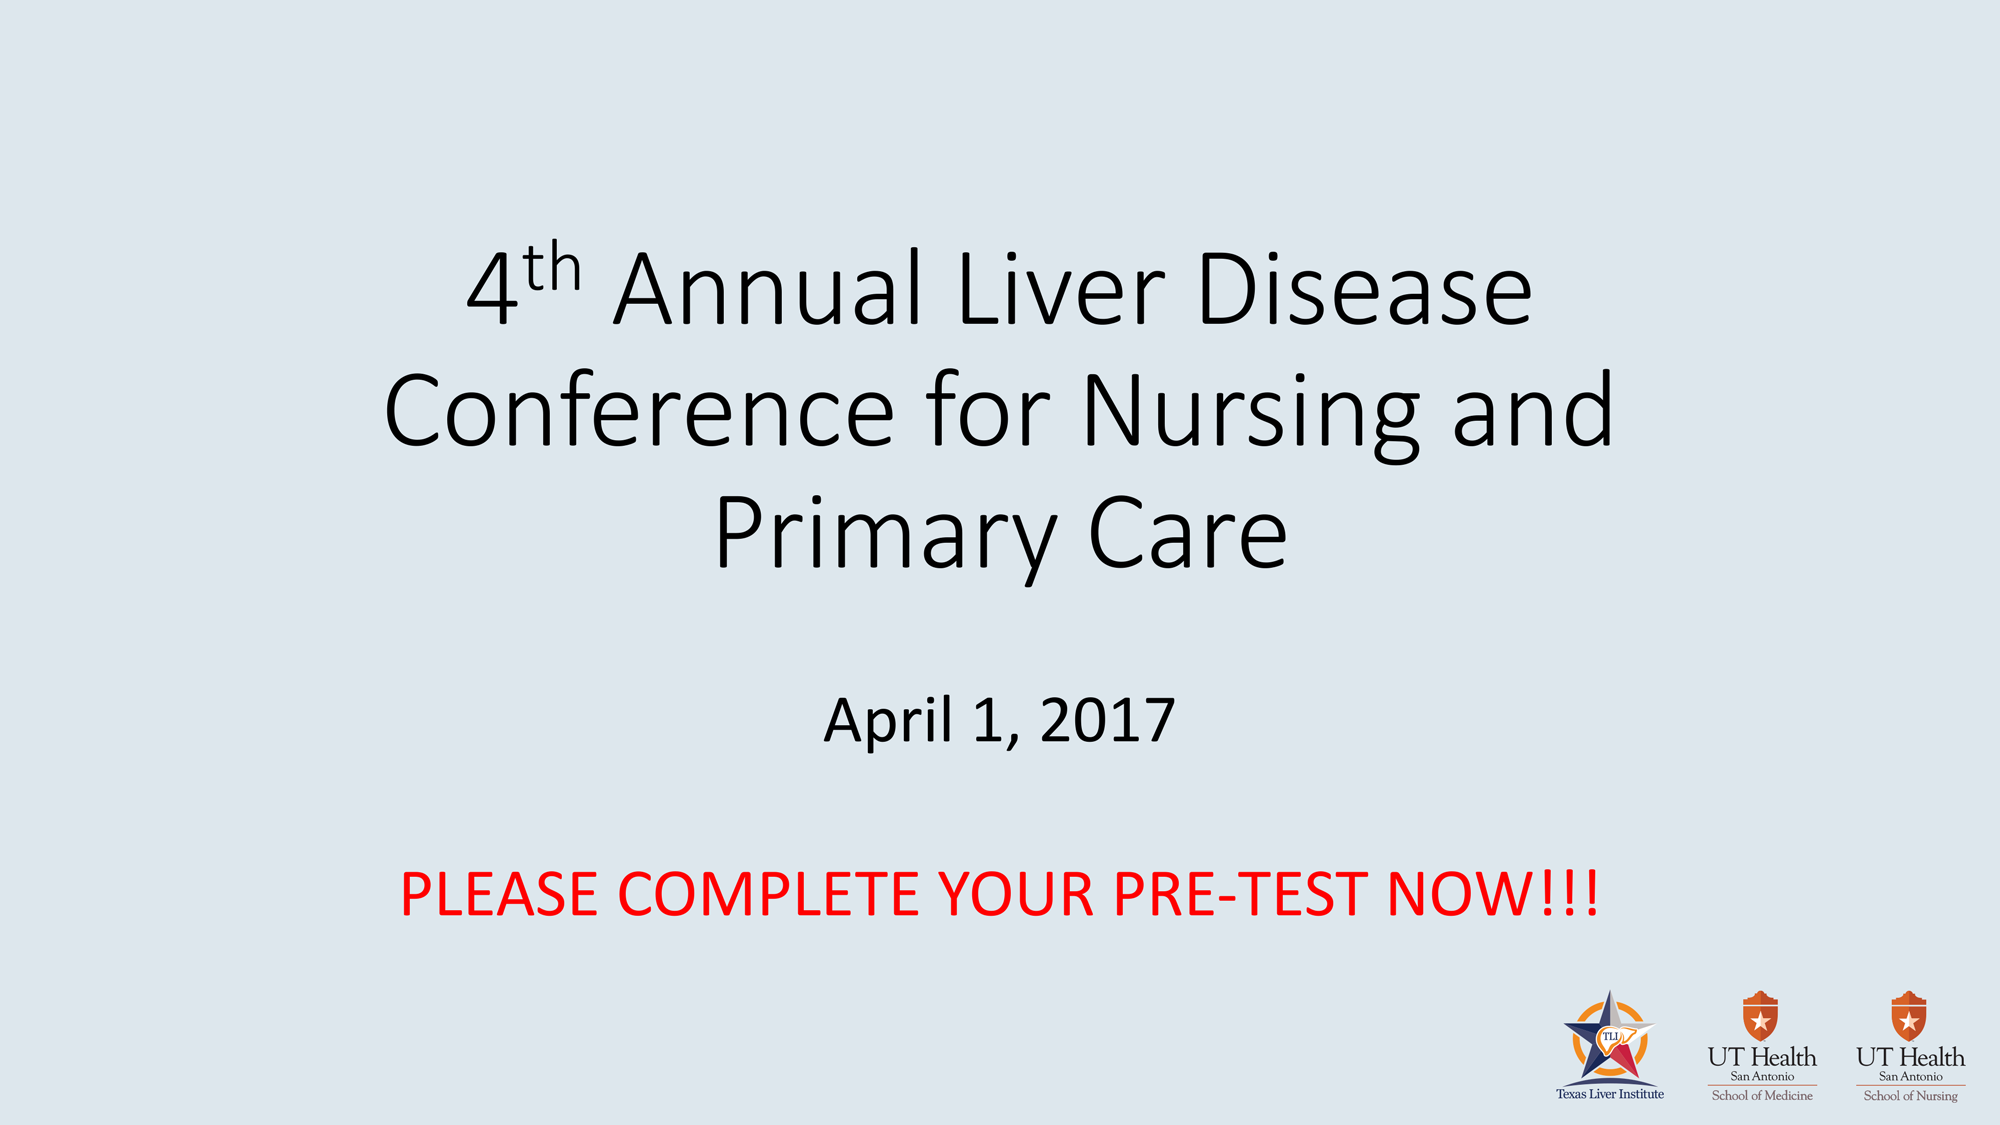 4th Annual Liver Disease Conference for Nursing and Primary Care